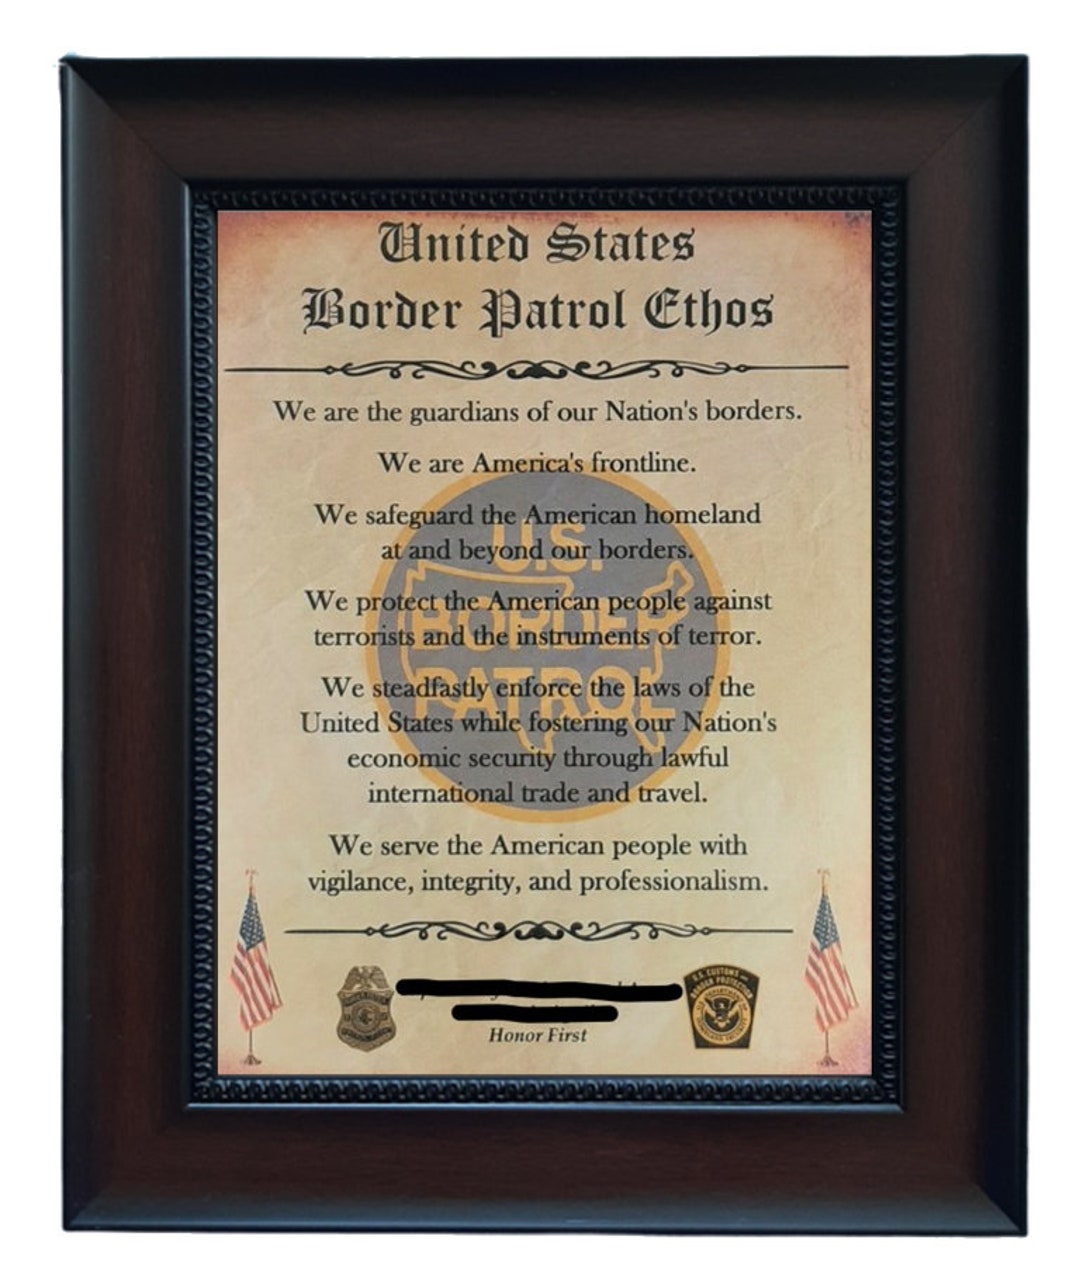 Honor First - United States Border Patrol 